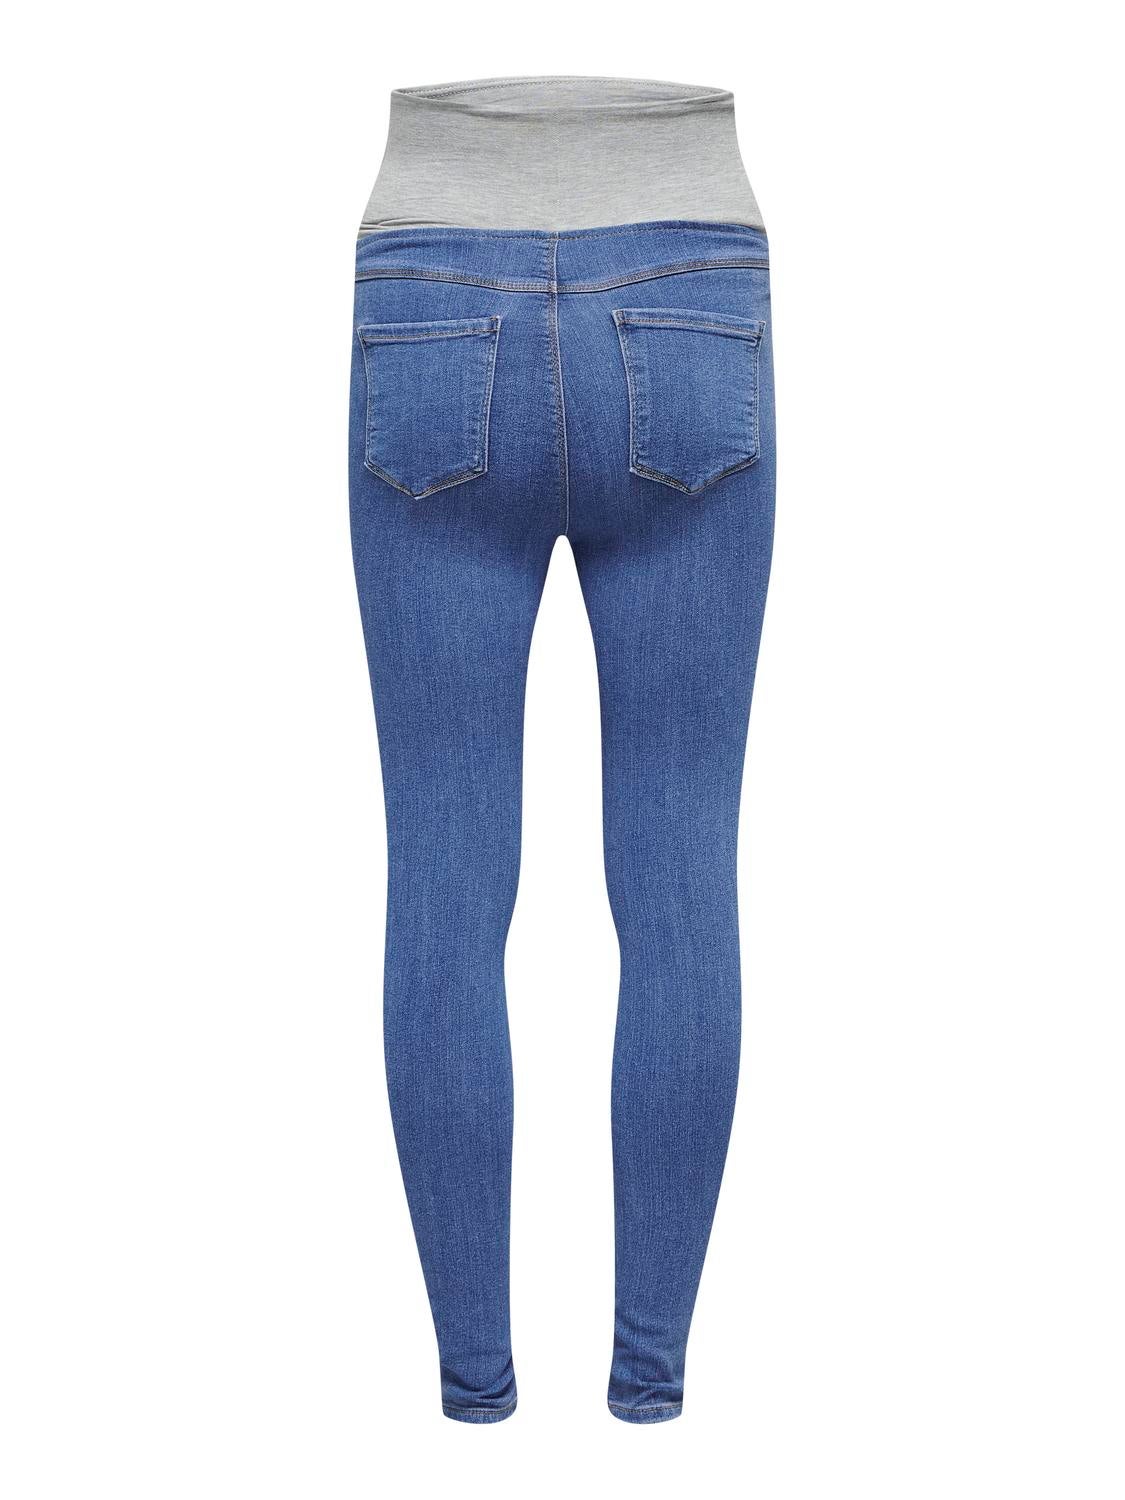 Exclusive! High Quality New Look™ Dark Blue Mid Rise 'Life & Shape' Emilee  Jeggings